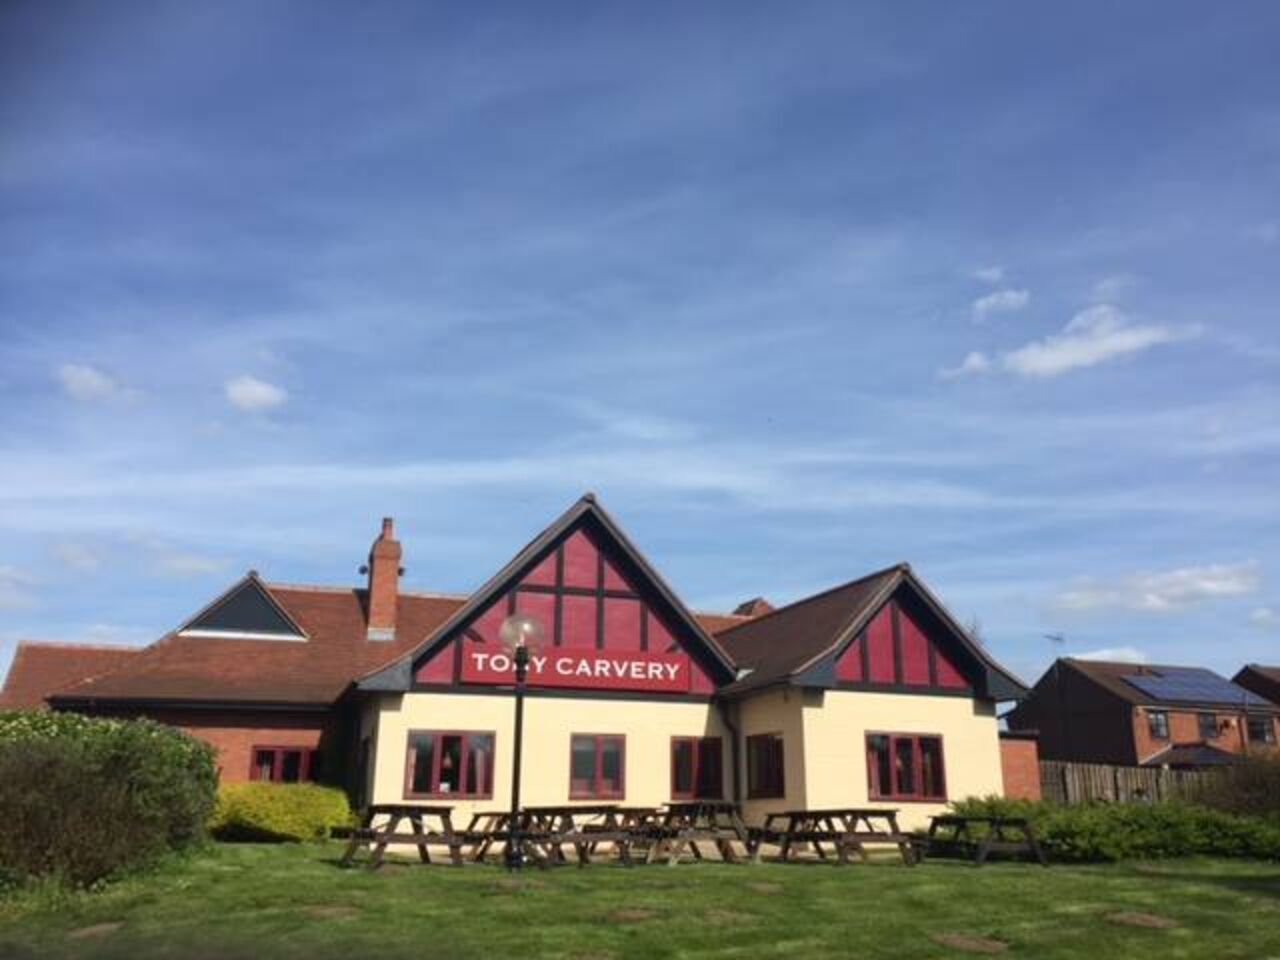 A photo of Toby Carvery Edenthorpe